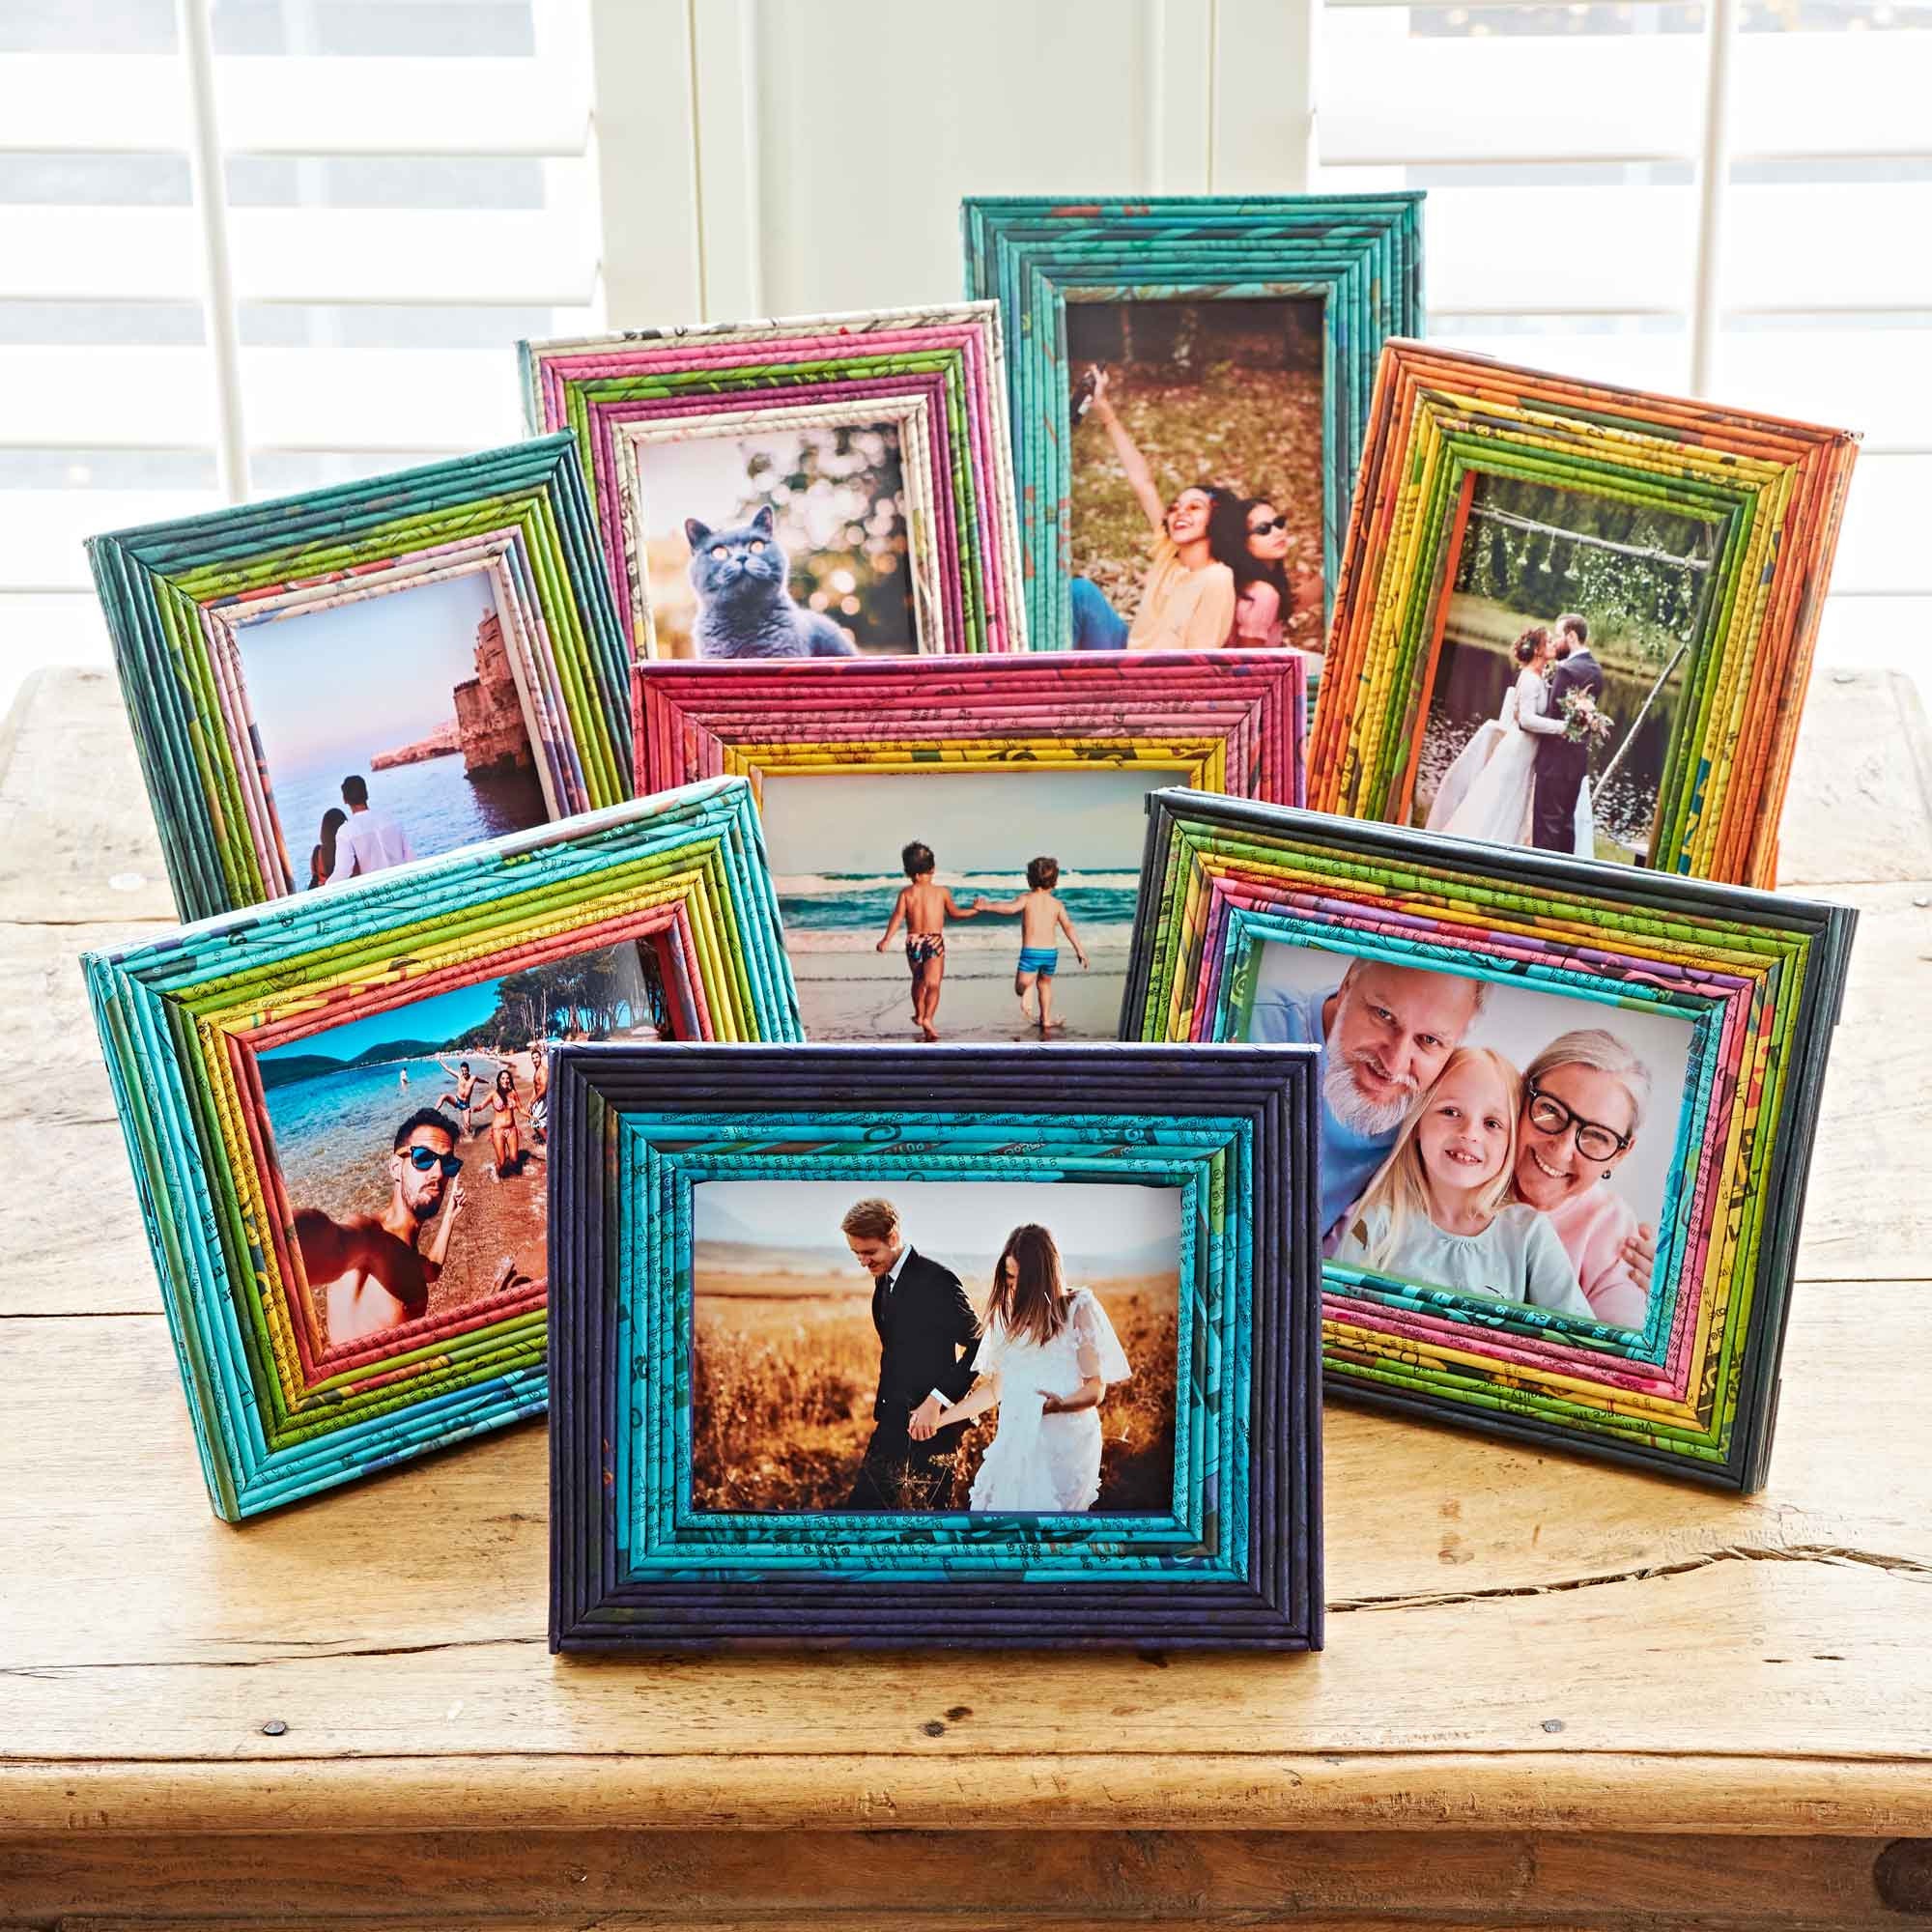 Cartoon Paper Cardboard Child Picture Frames 4x6 Inch Photo Frame